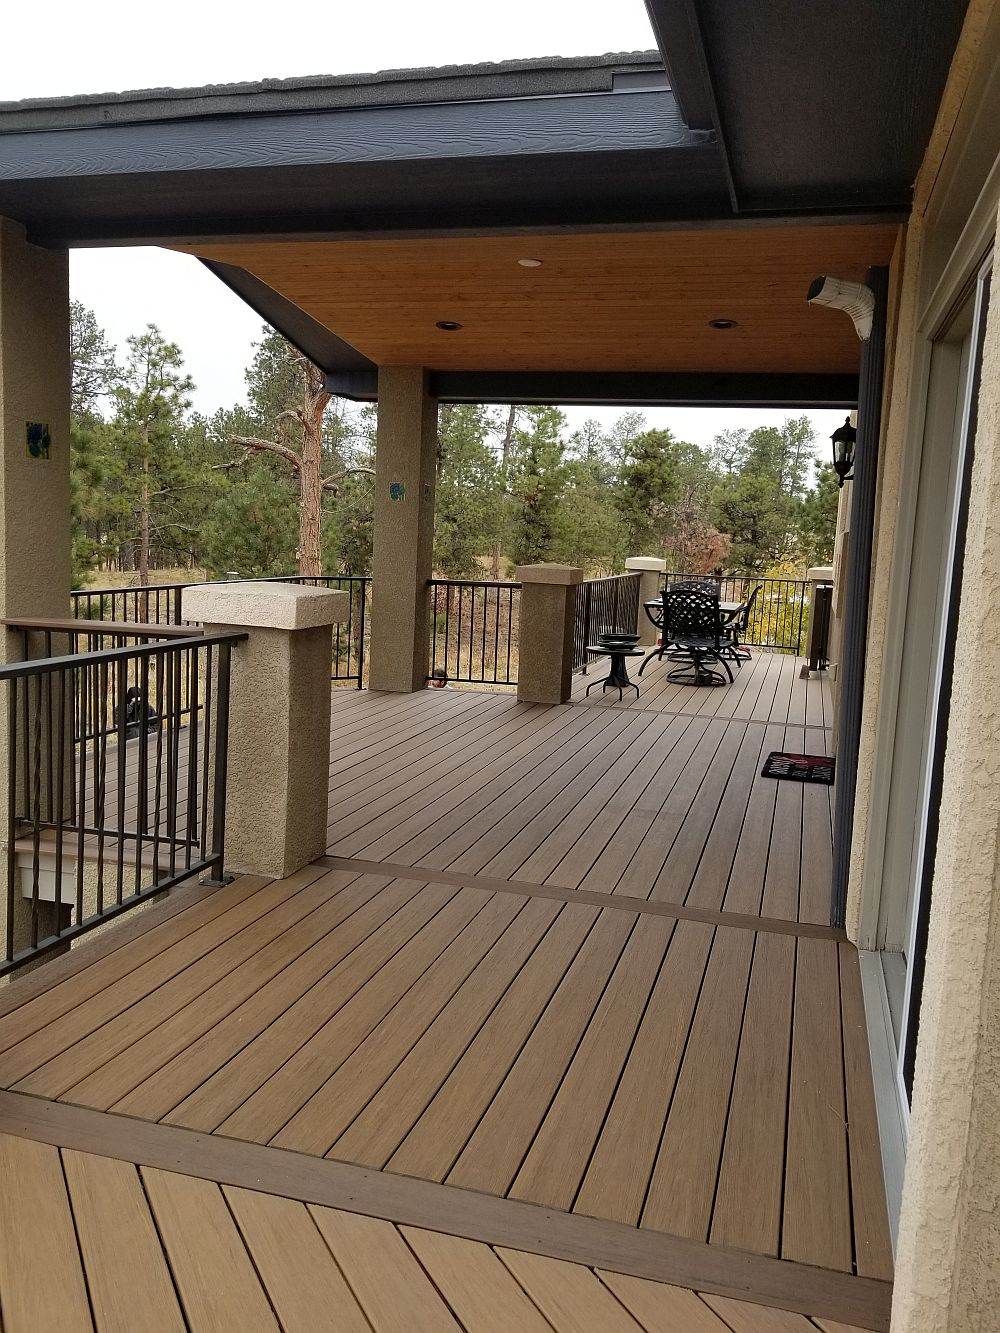 Composite decking laid at 90-degrees to the joists with a picture frame border and divider boards.